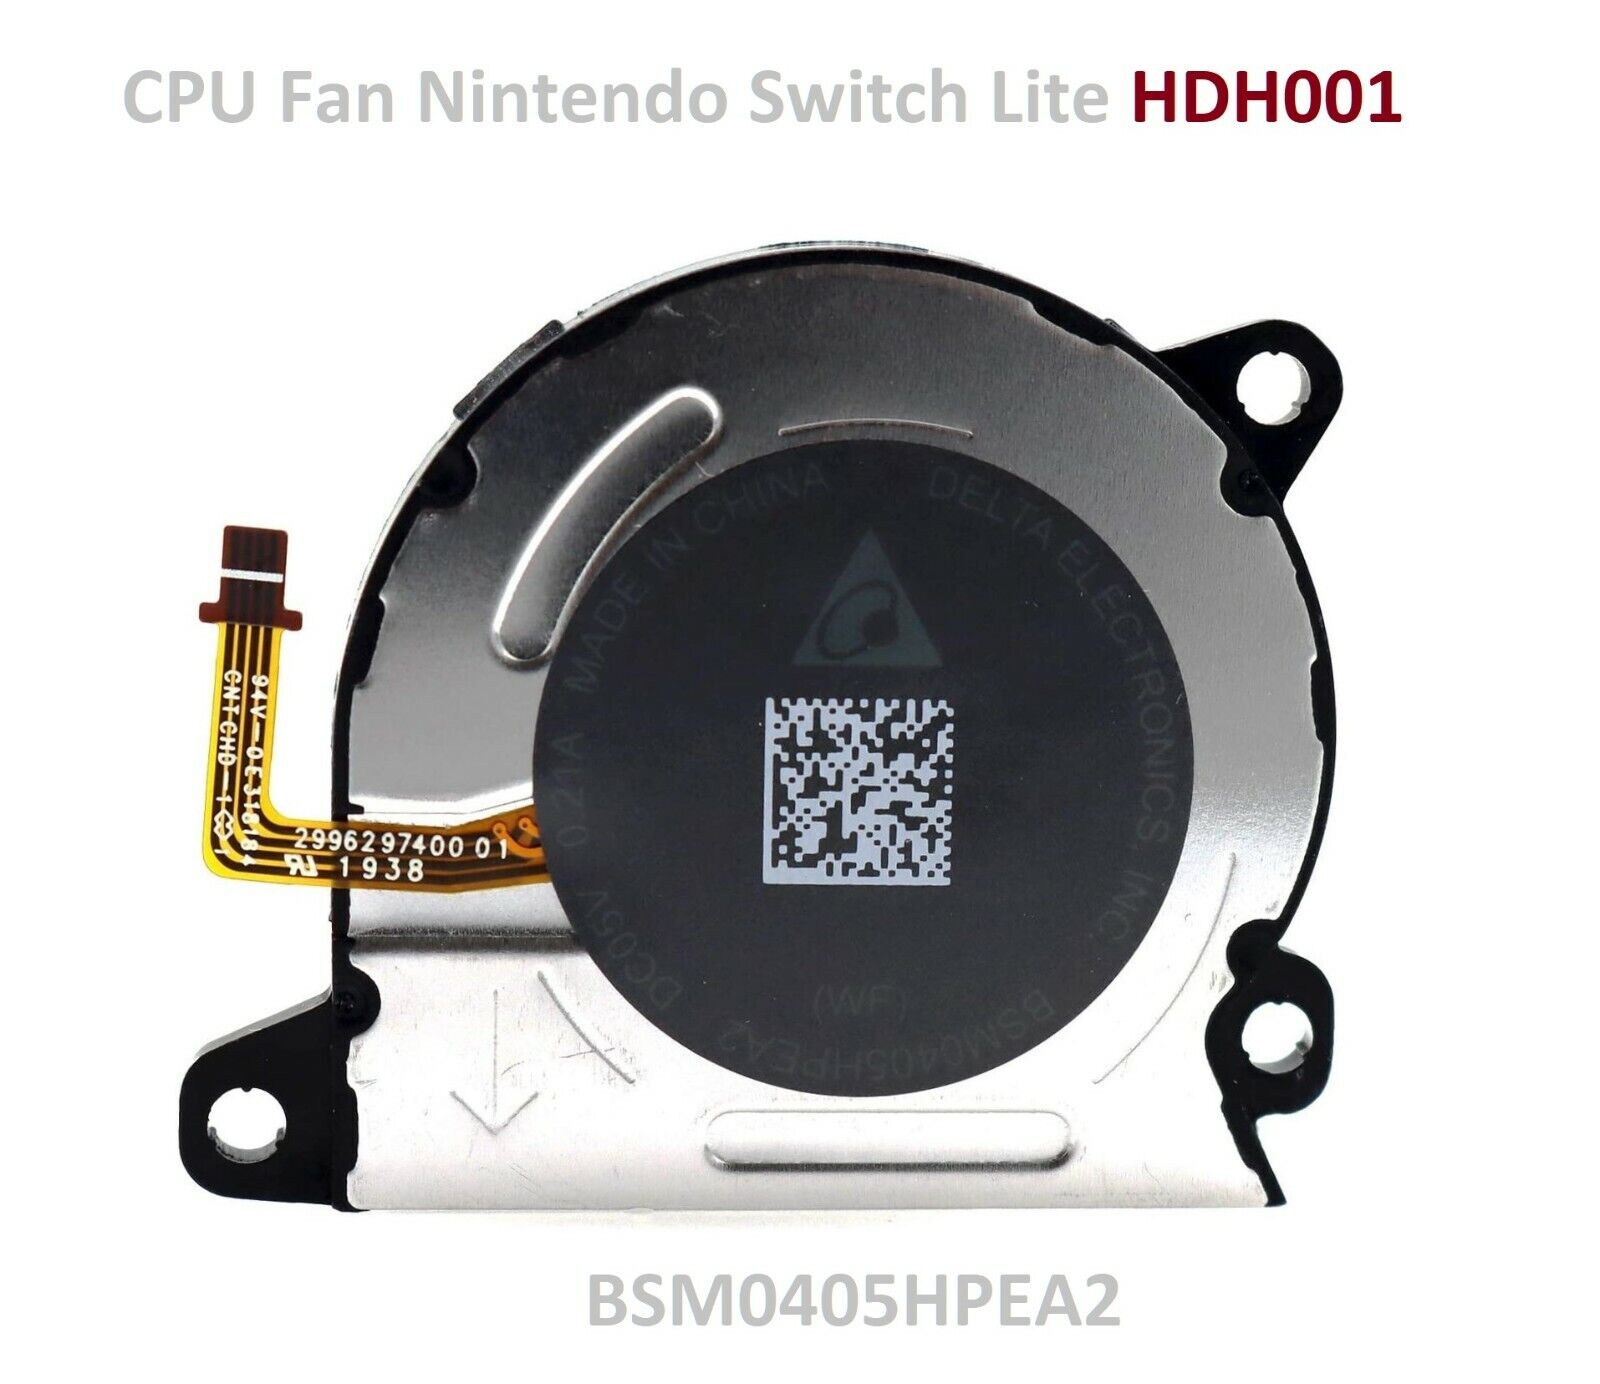 OEM NINTENDO SWITCH LITE HDH-001 REPLACEMENT CPU COOLING FAN BSM0405HPEA2